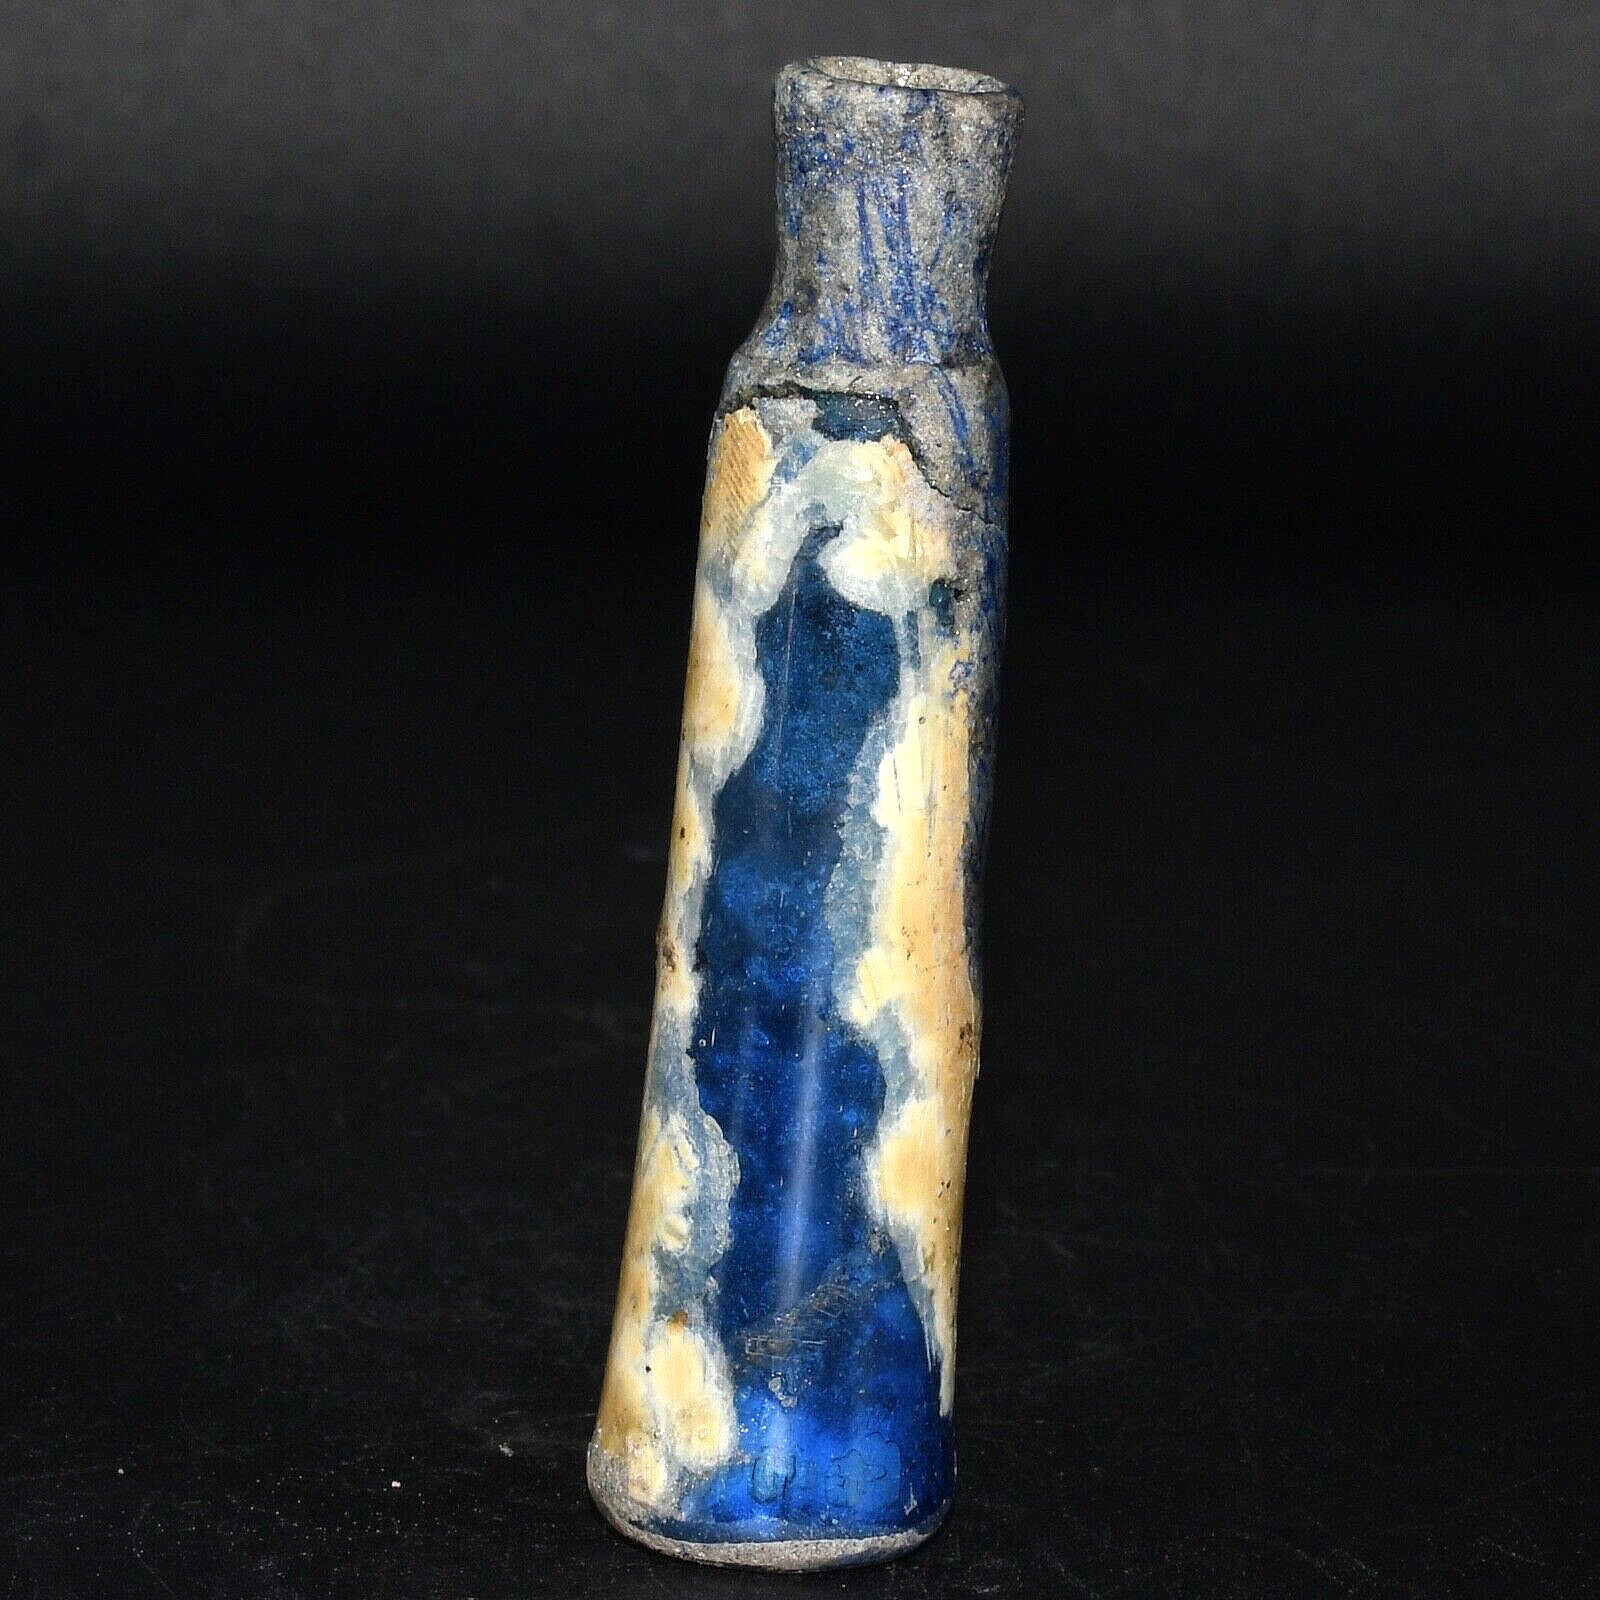 Authentic Ancient Roman Medicine Cosmetics Glass Vial with Beautiful Patina